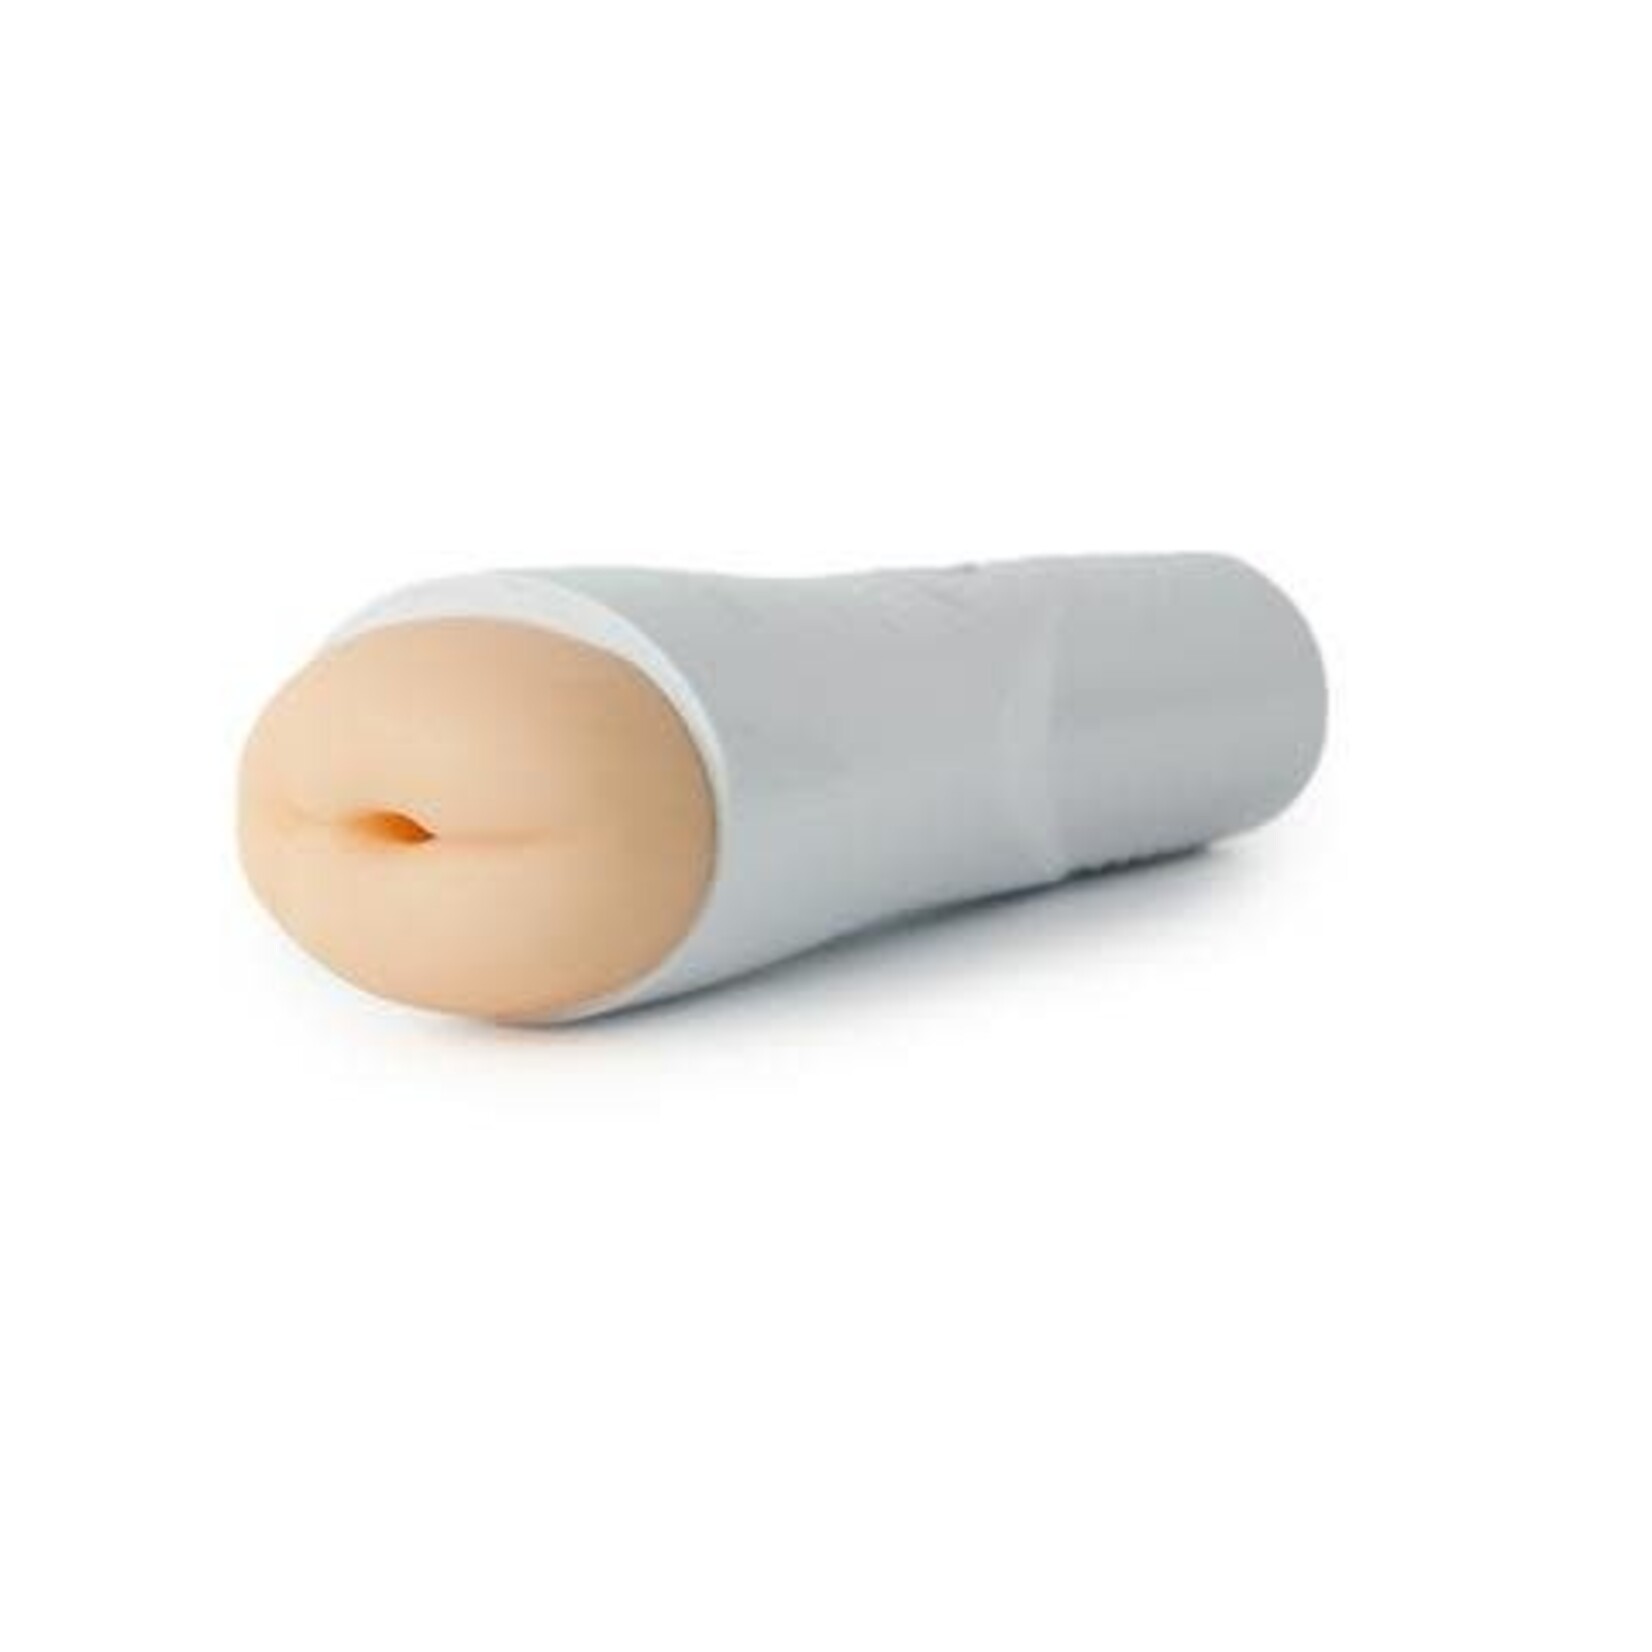 Topco Sales Release Vibrating CyberSkin Stroker - Tight Ass